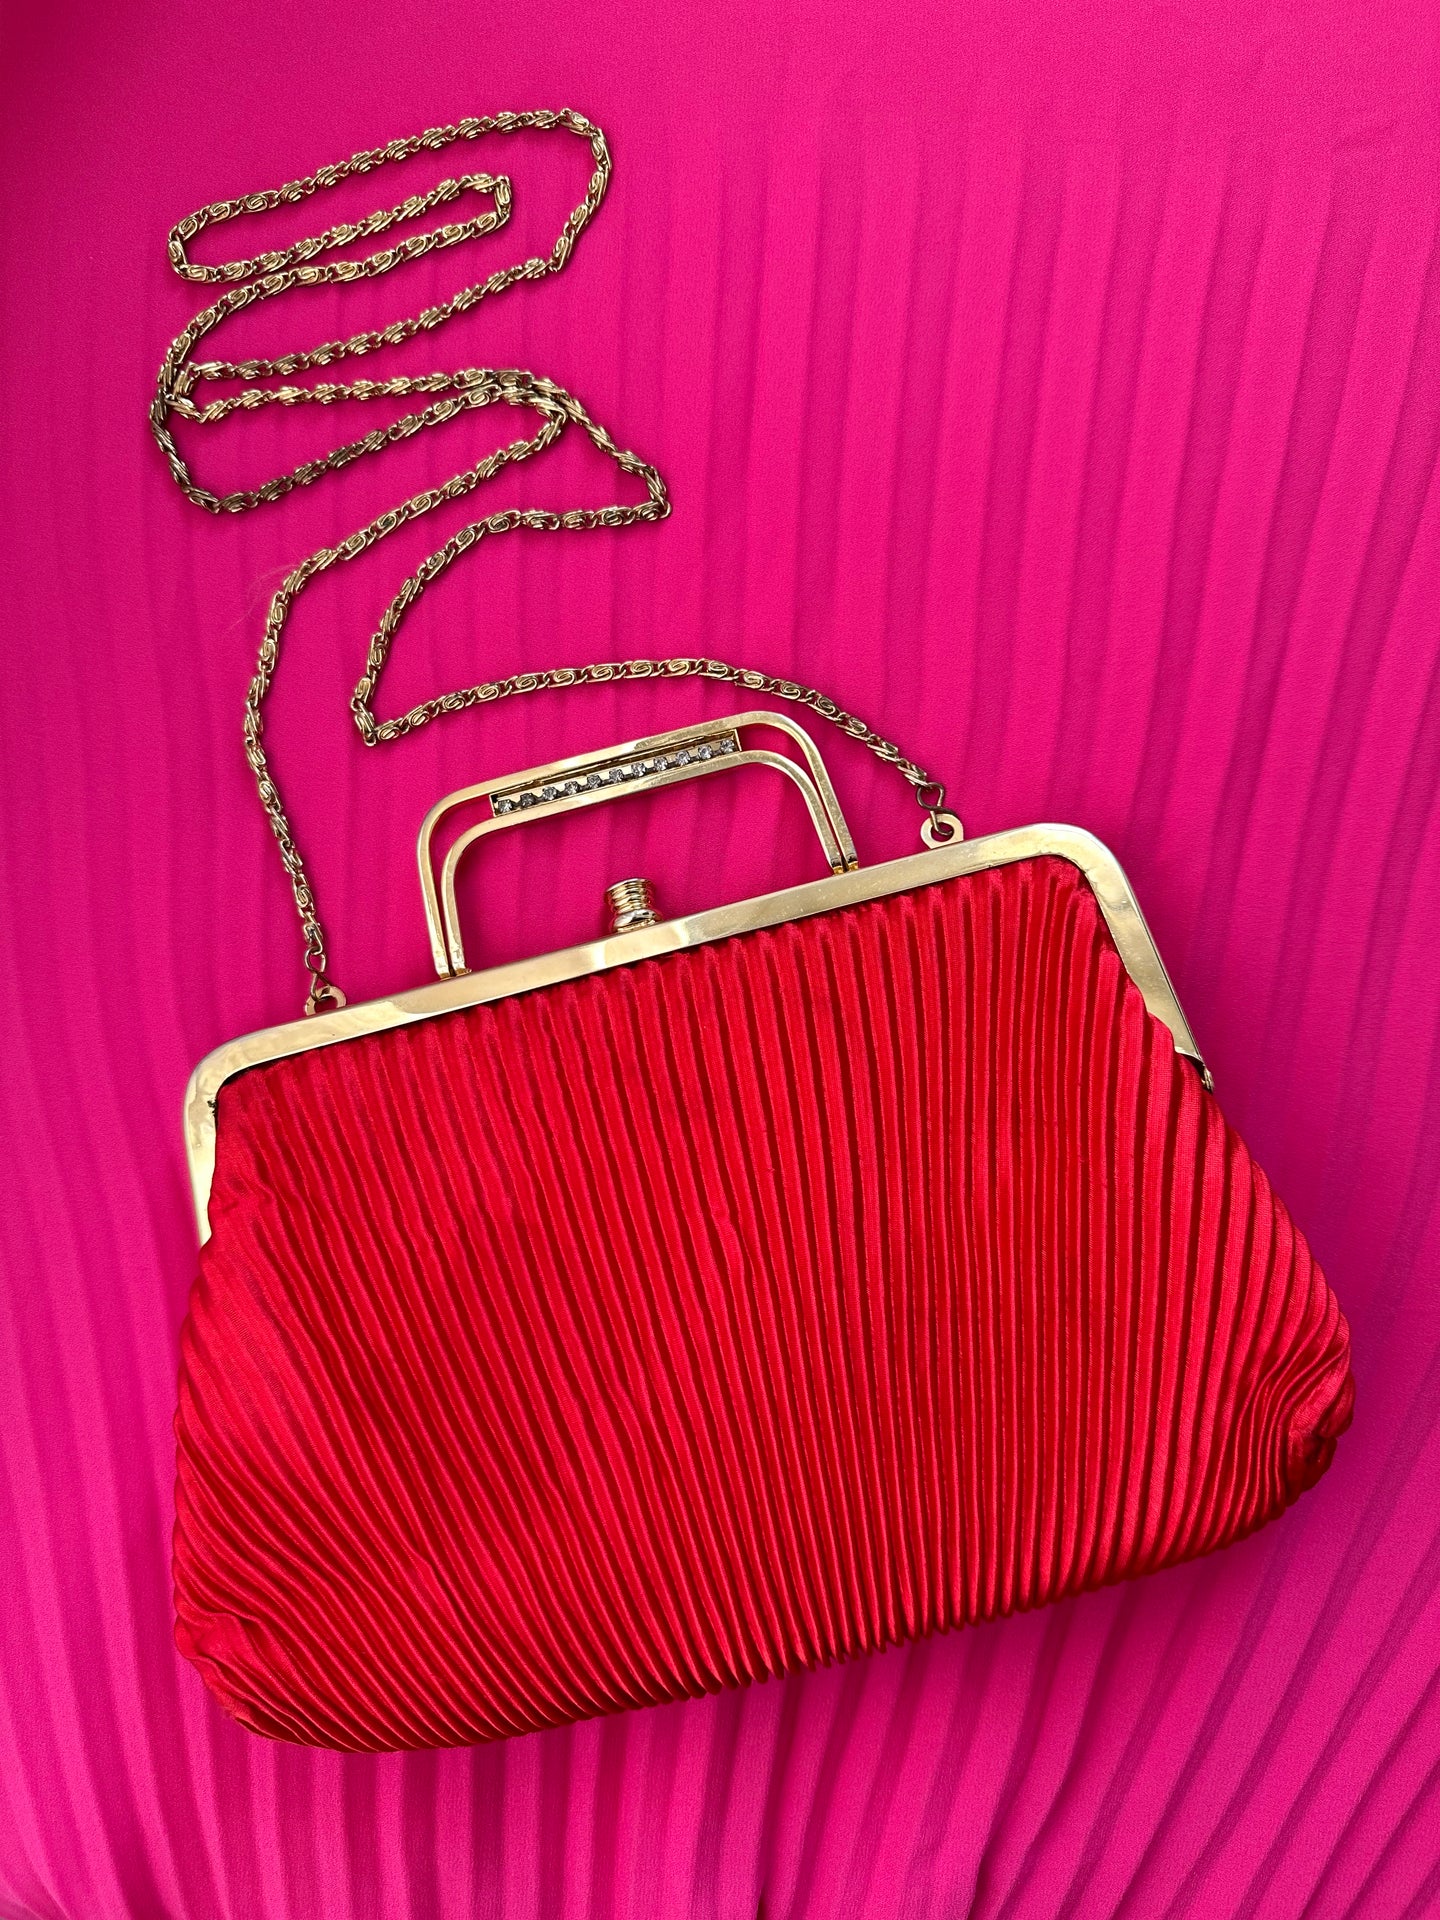 Pleated Red Purse